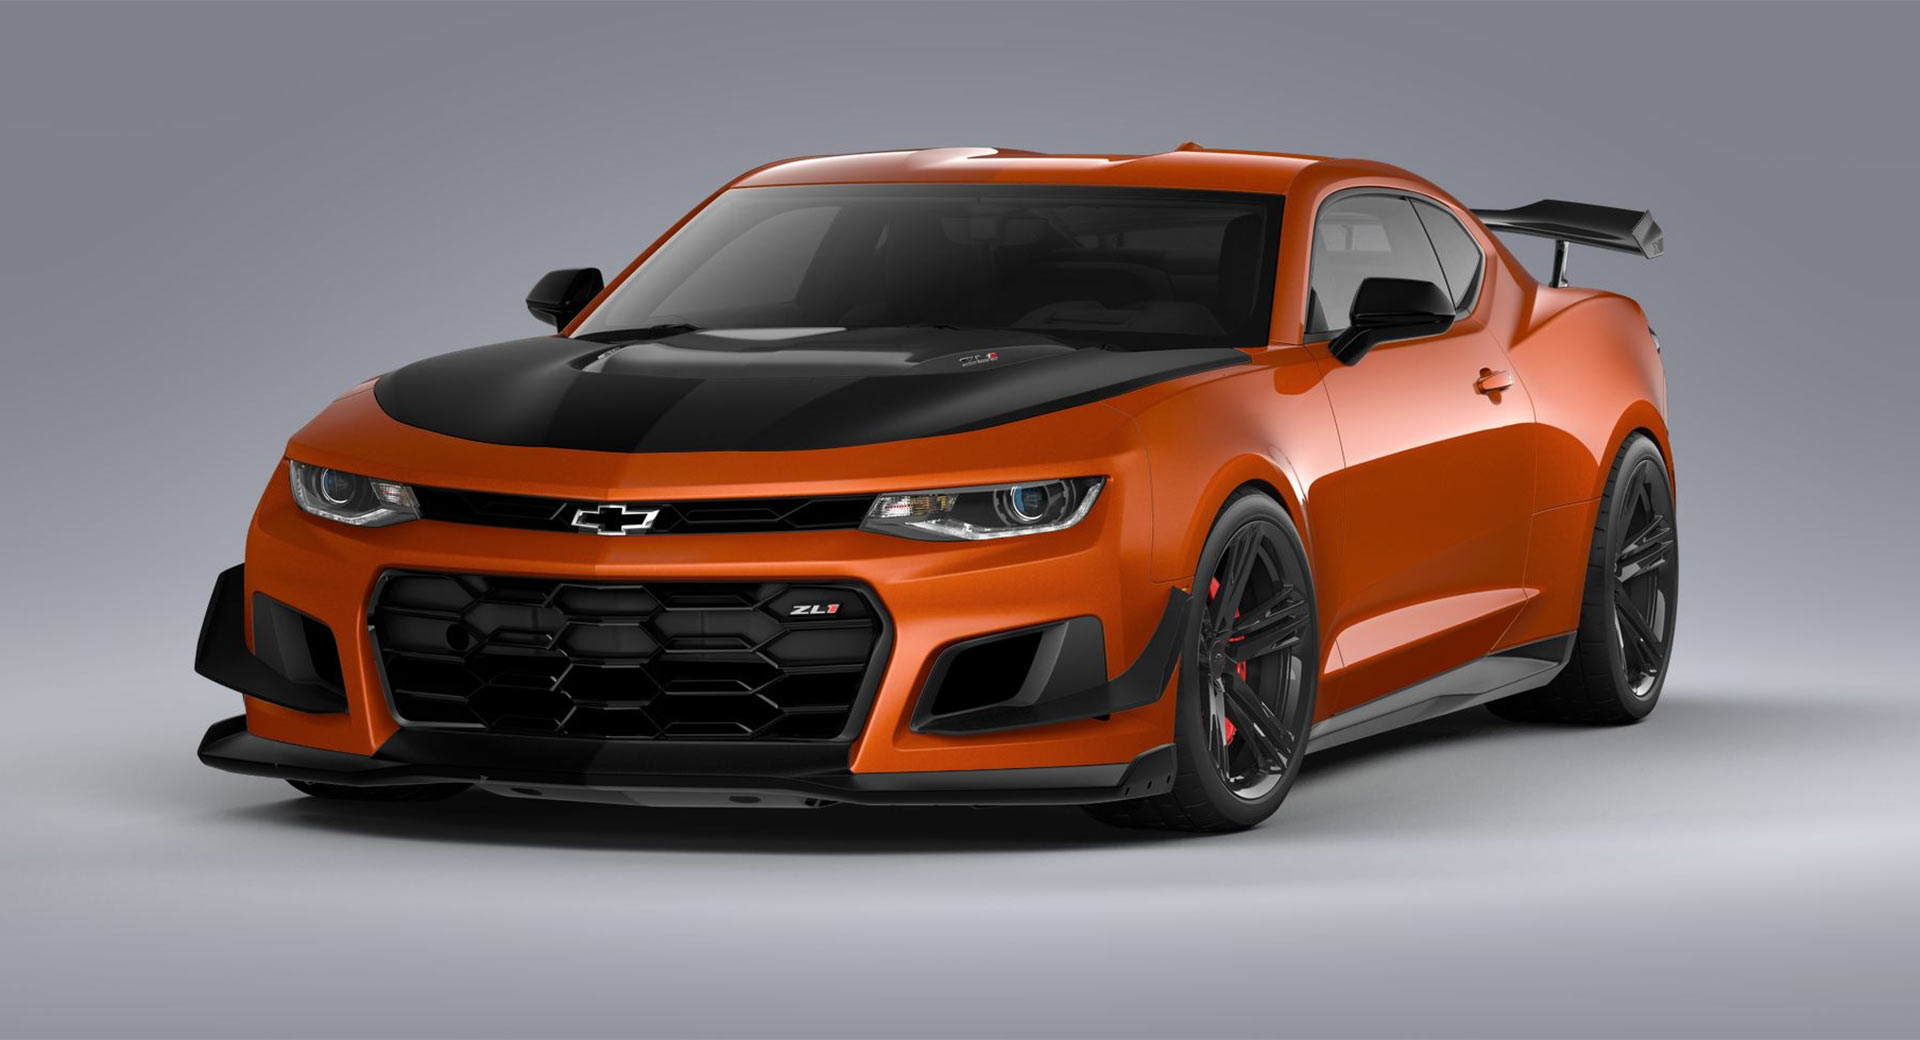 2022 Chevy Camaro Configurator Goes Live, What Does Your Perfect